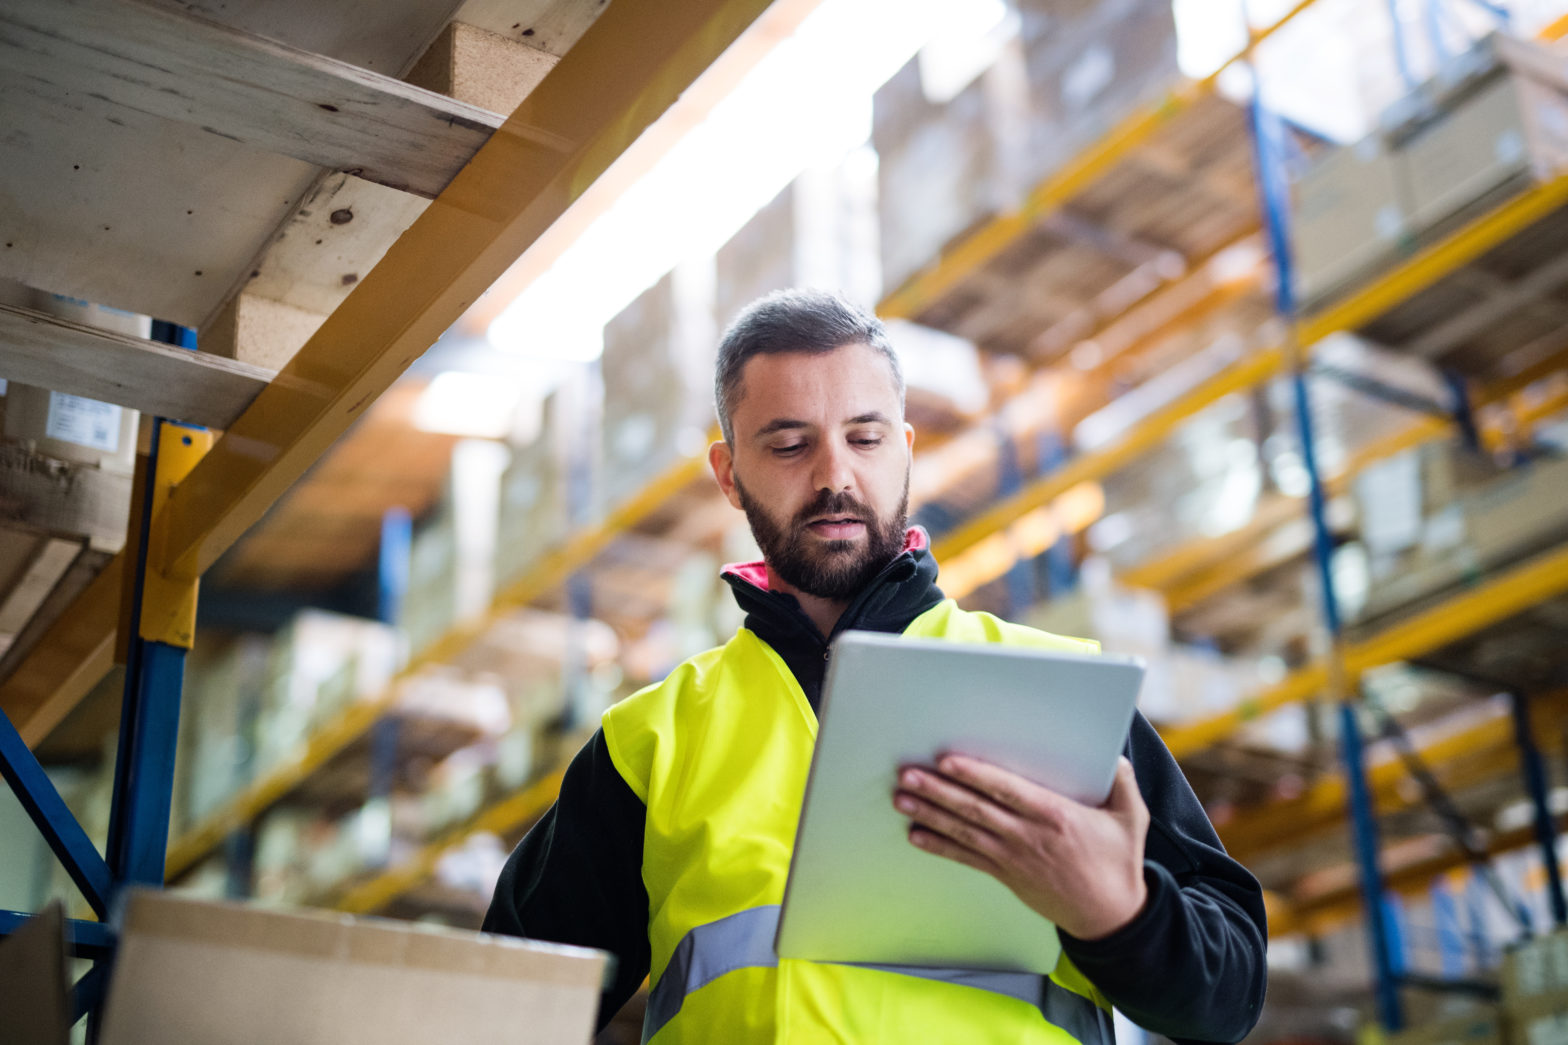 Male warehouse worker looking at a tablet